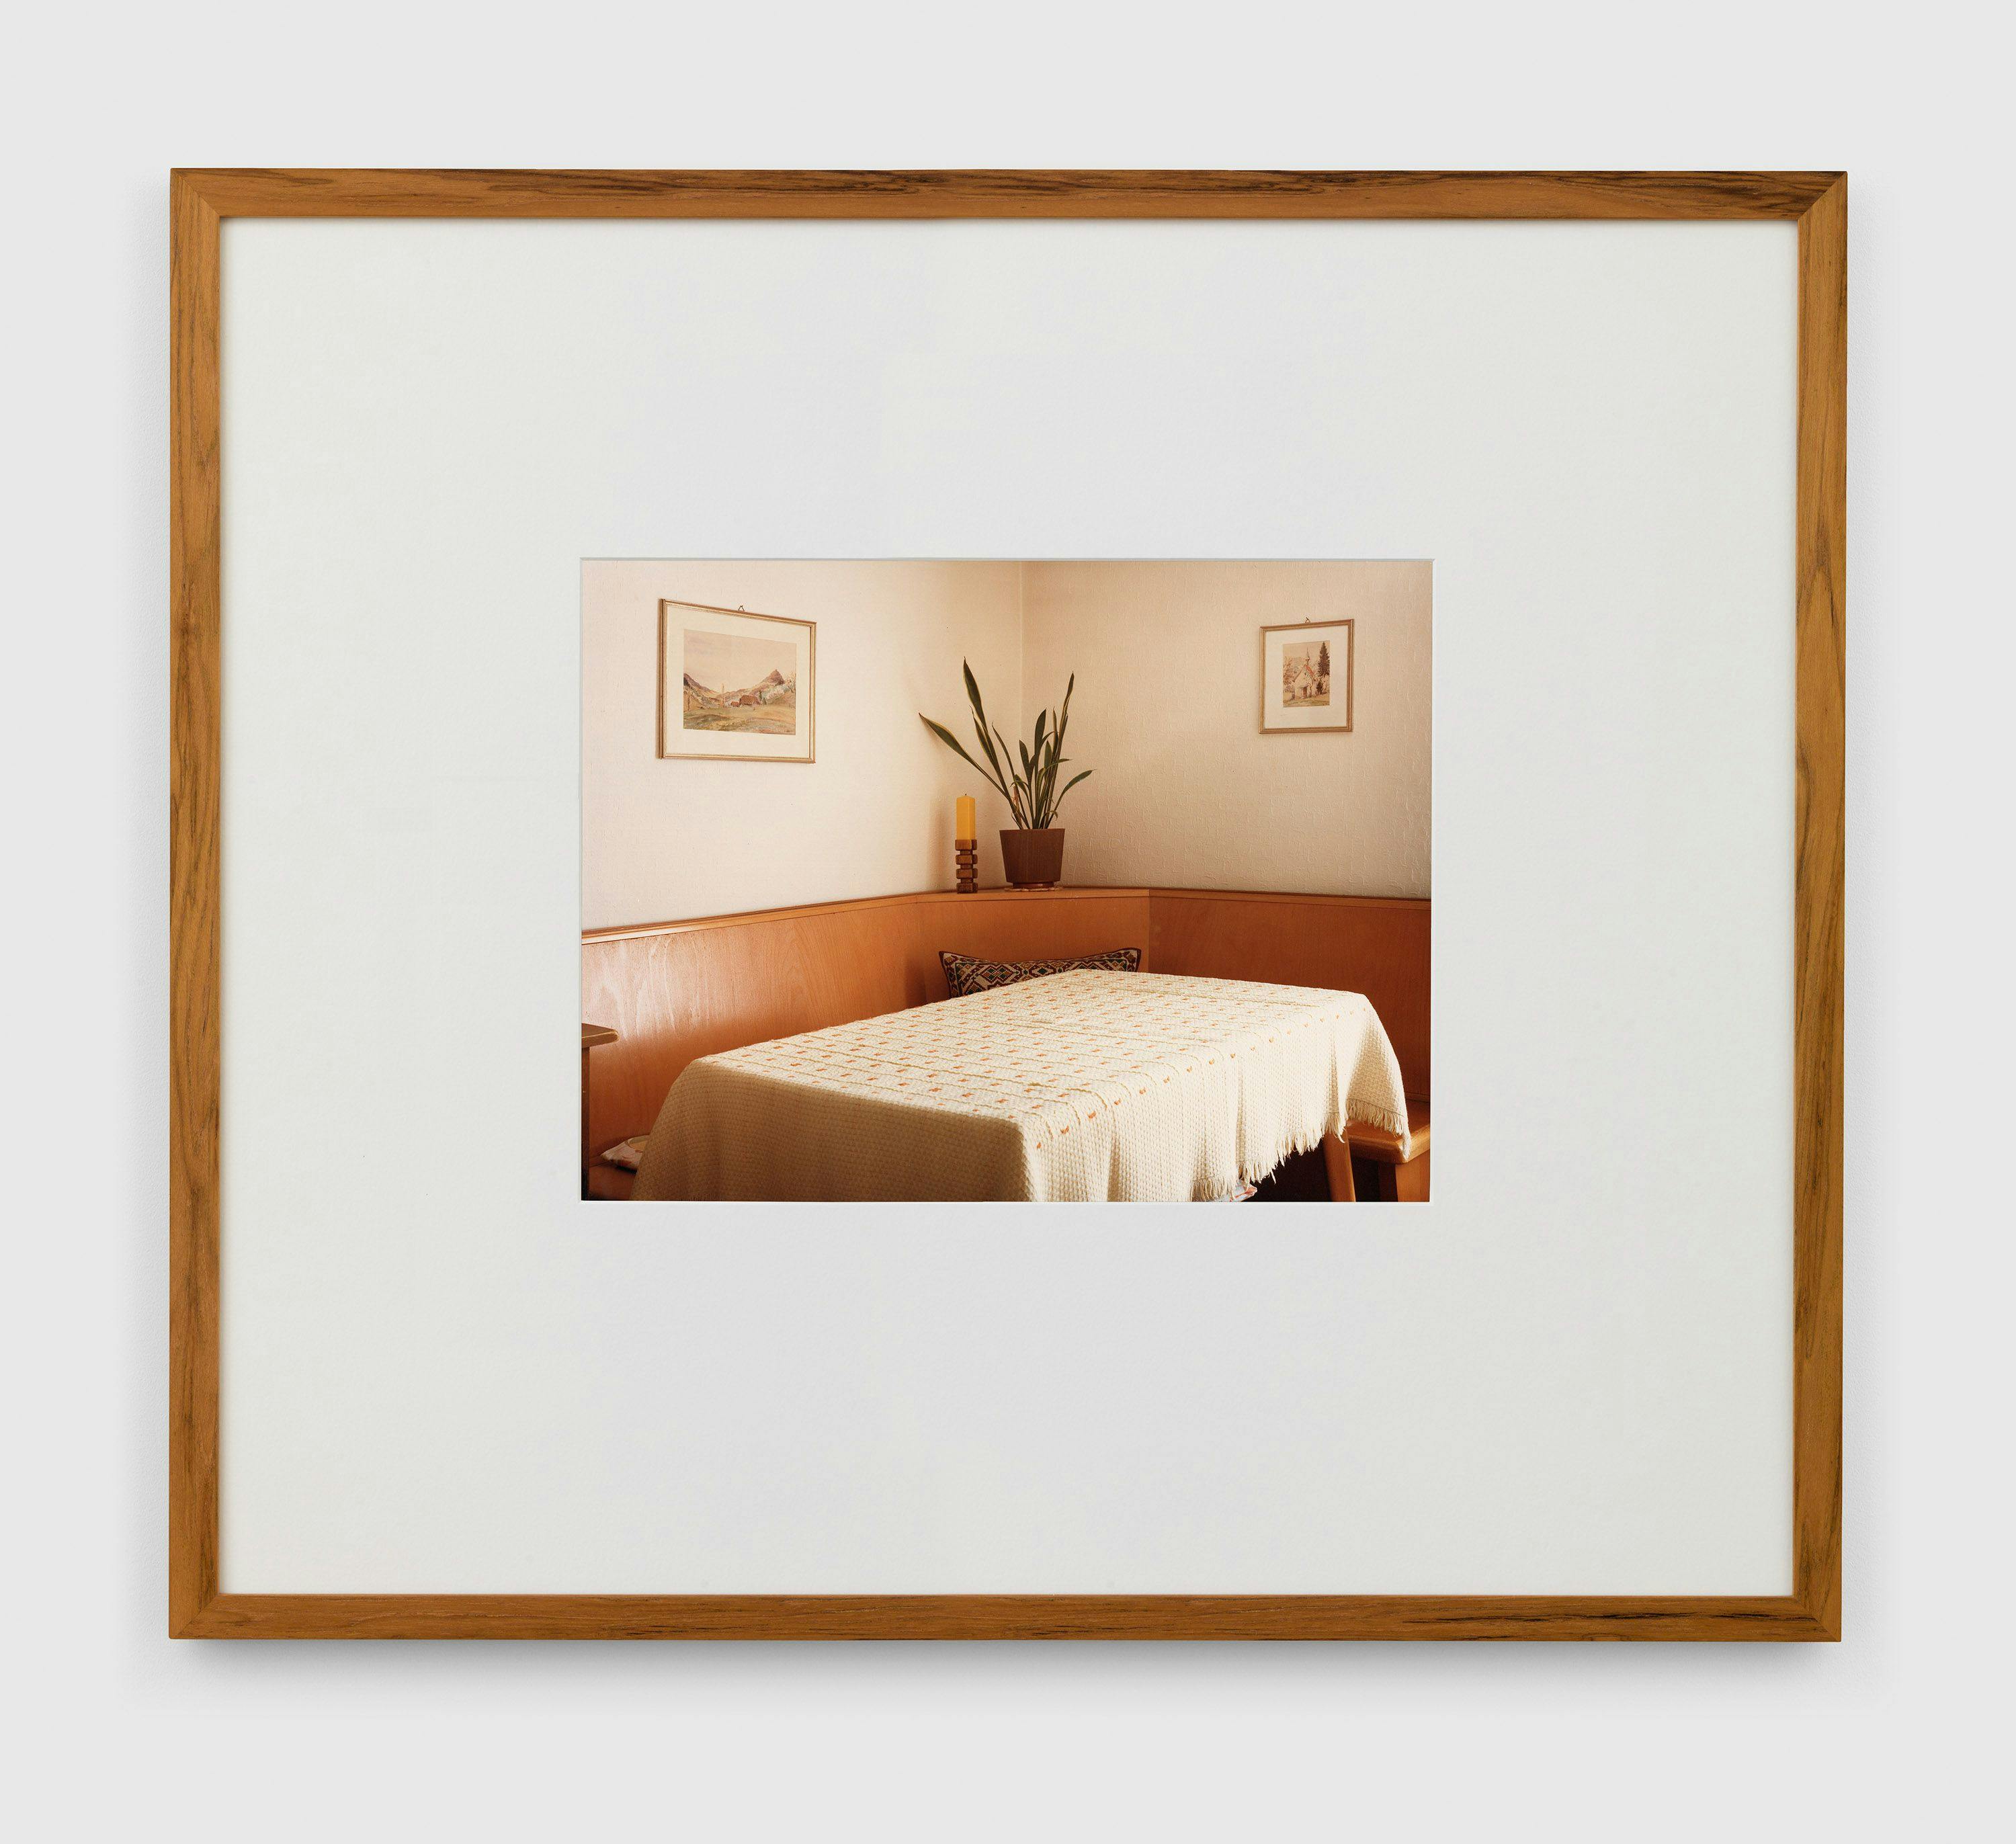 A chromogenic print by Thomas Ruff, titled Interieur 6B, dated 1980.